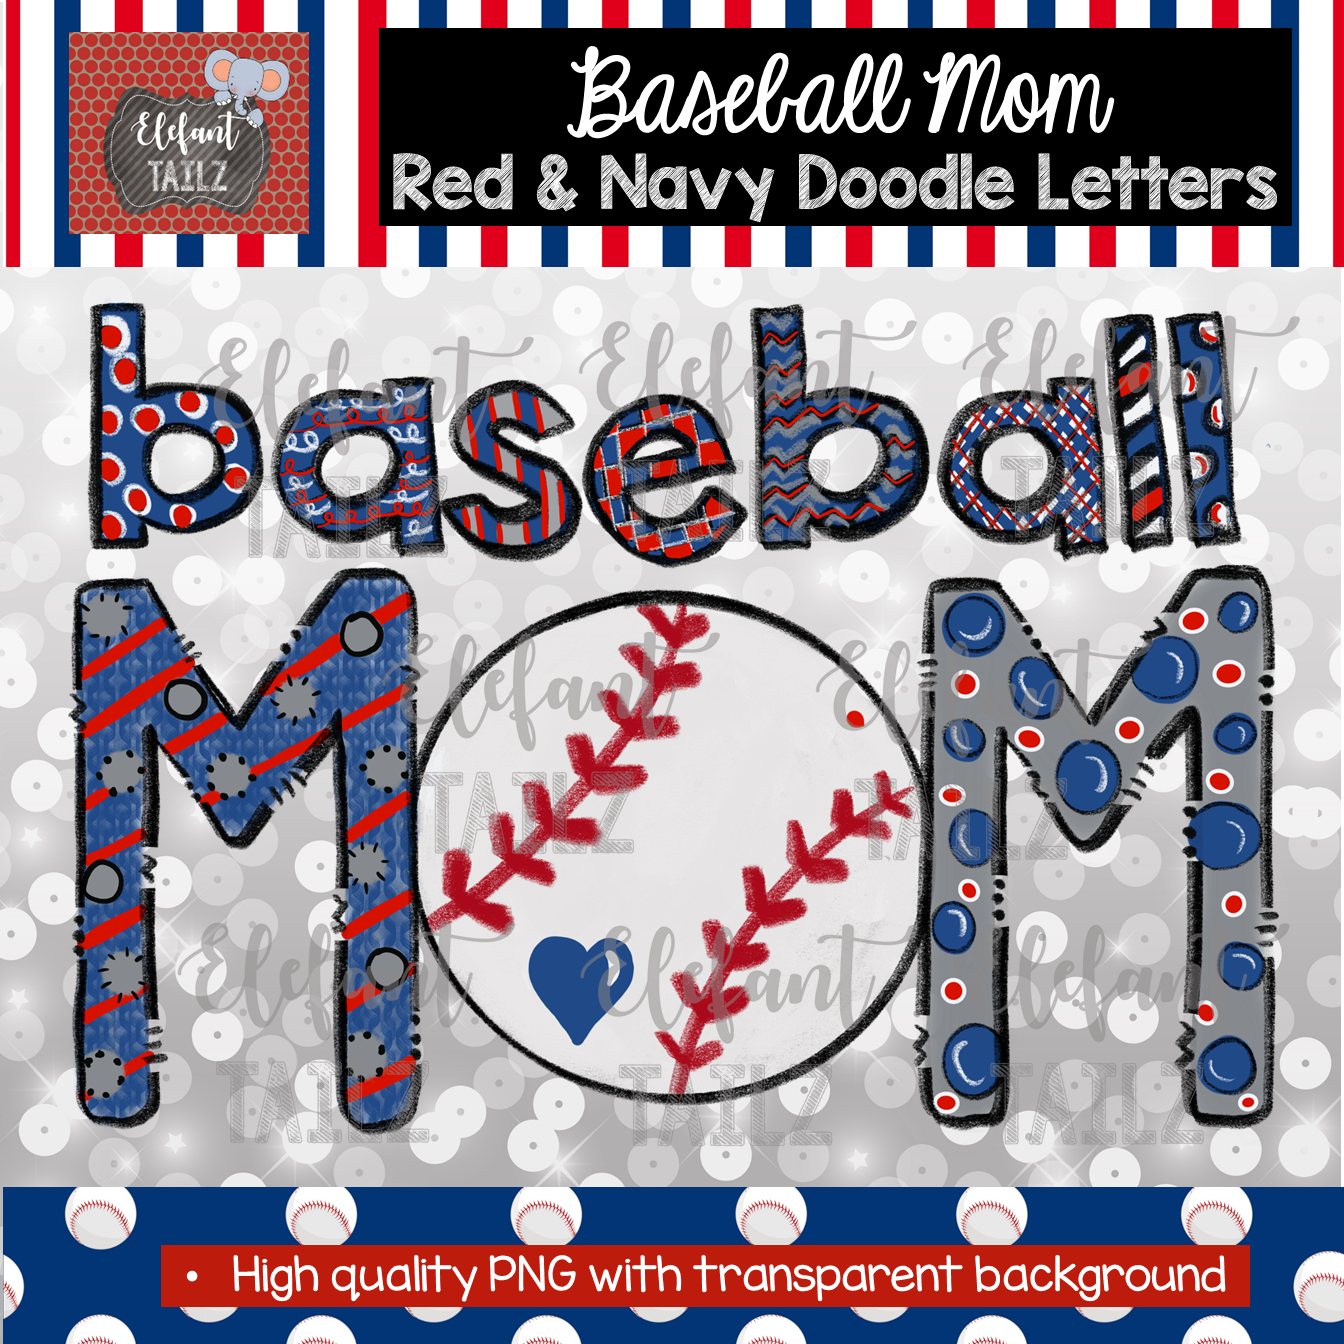 Baseball Mom Doodle Letters - Red & Navy